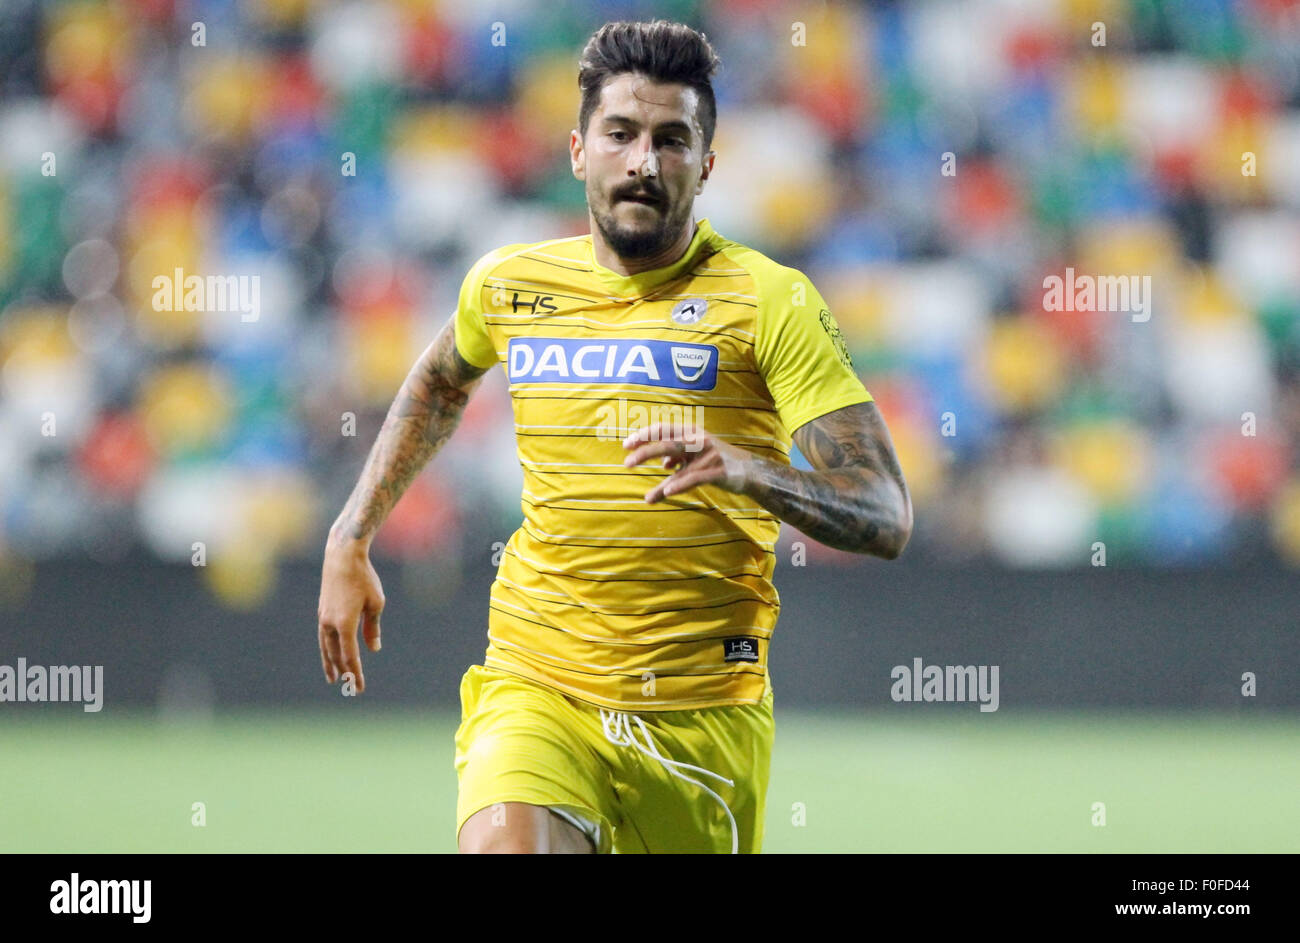 Udine, Italy. 13th August, 2015. Udinese's midfielder Panagiotis Giorgios Kone during the friendly pre-season football match Udinese Calcio v El-Jaish Sports Club on 13th August, 2015 at Friuli Stadium in Udine, Italy. Credit:  Andrea Spinelli/Alamy Live News Stock Photo